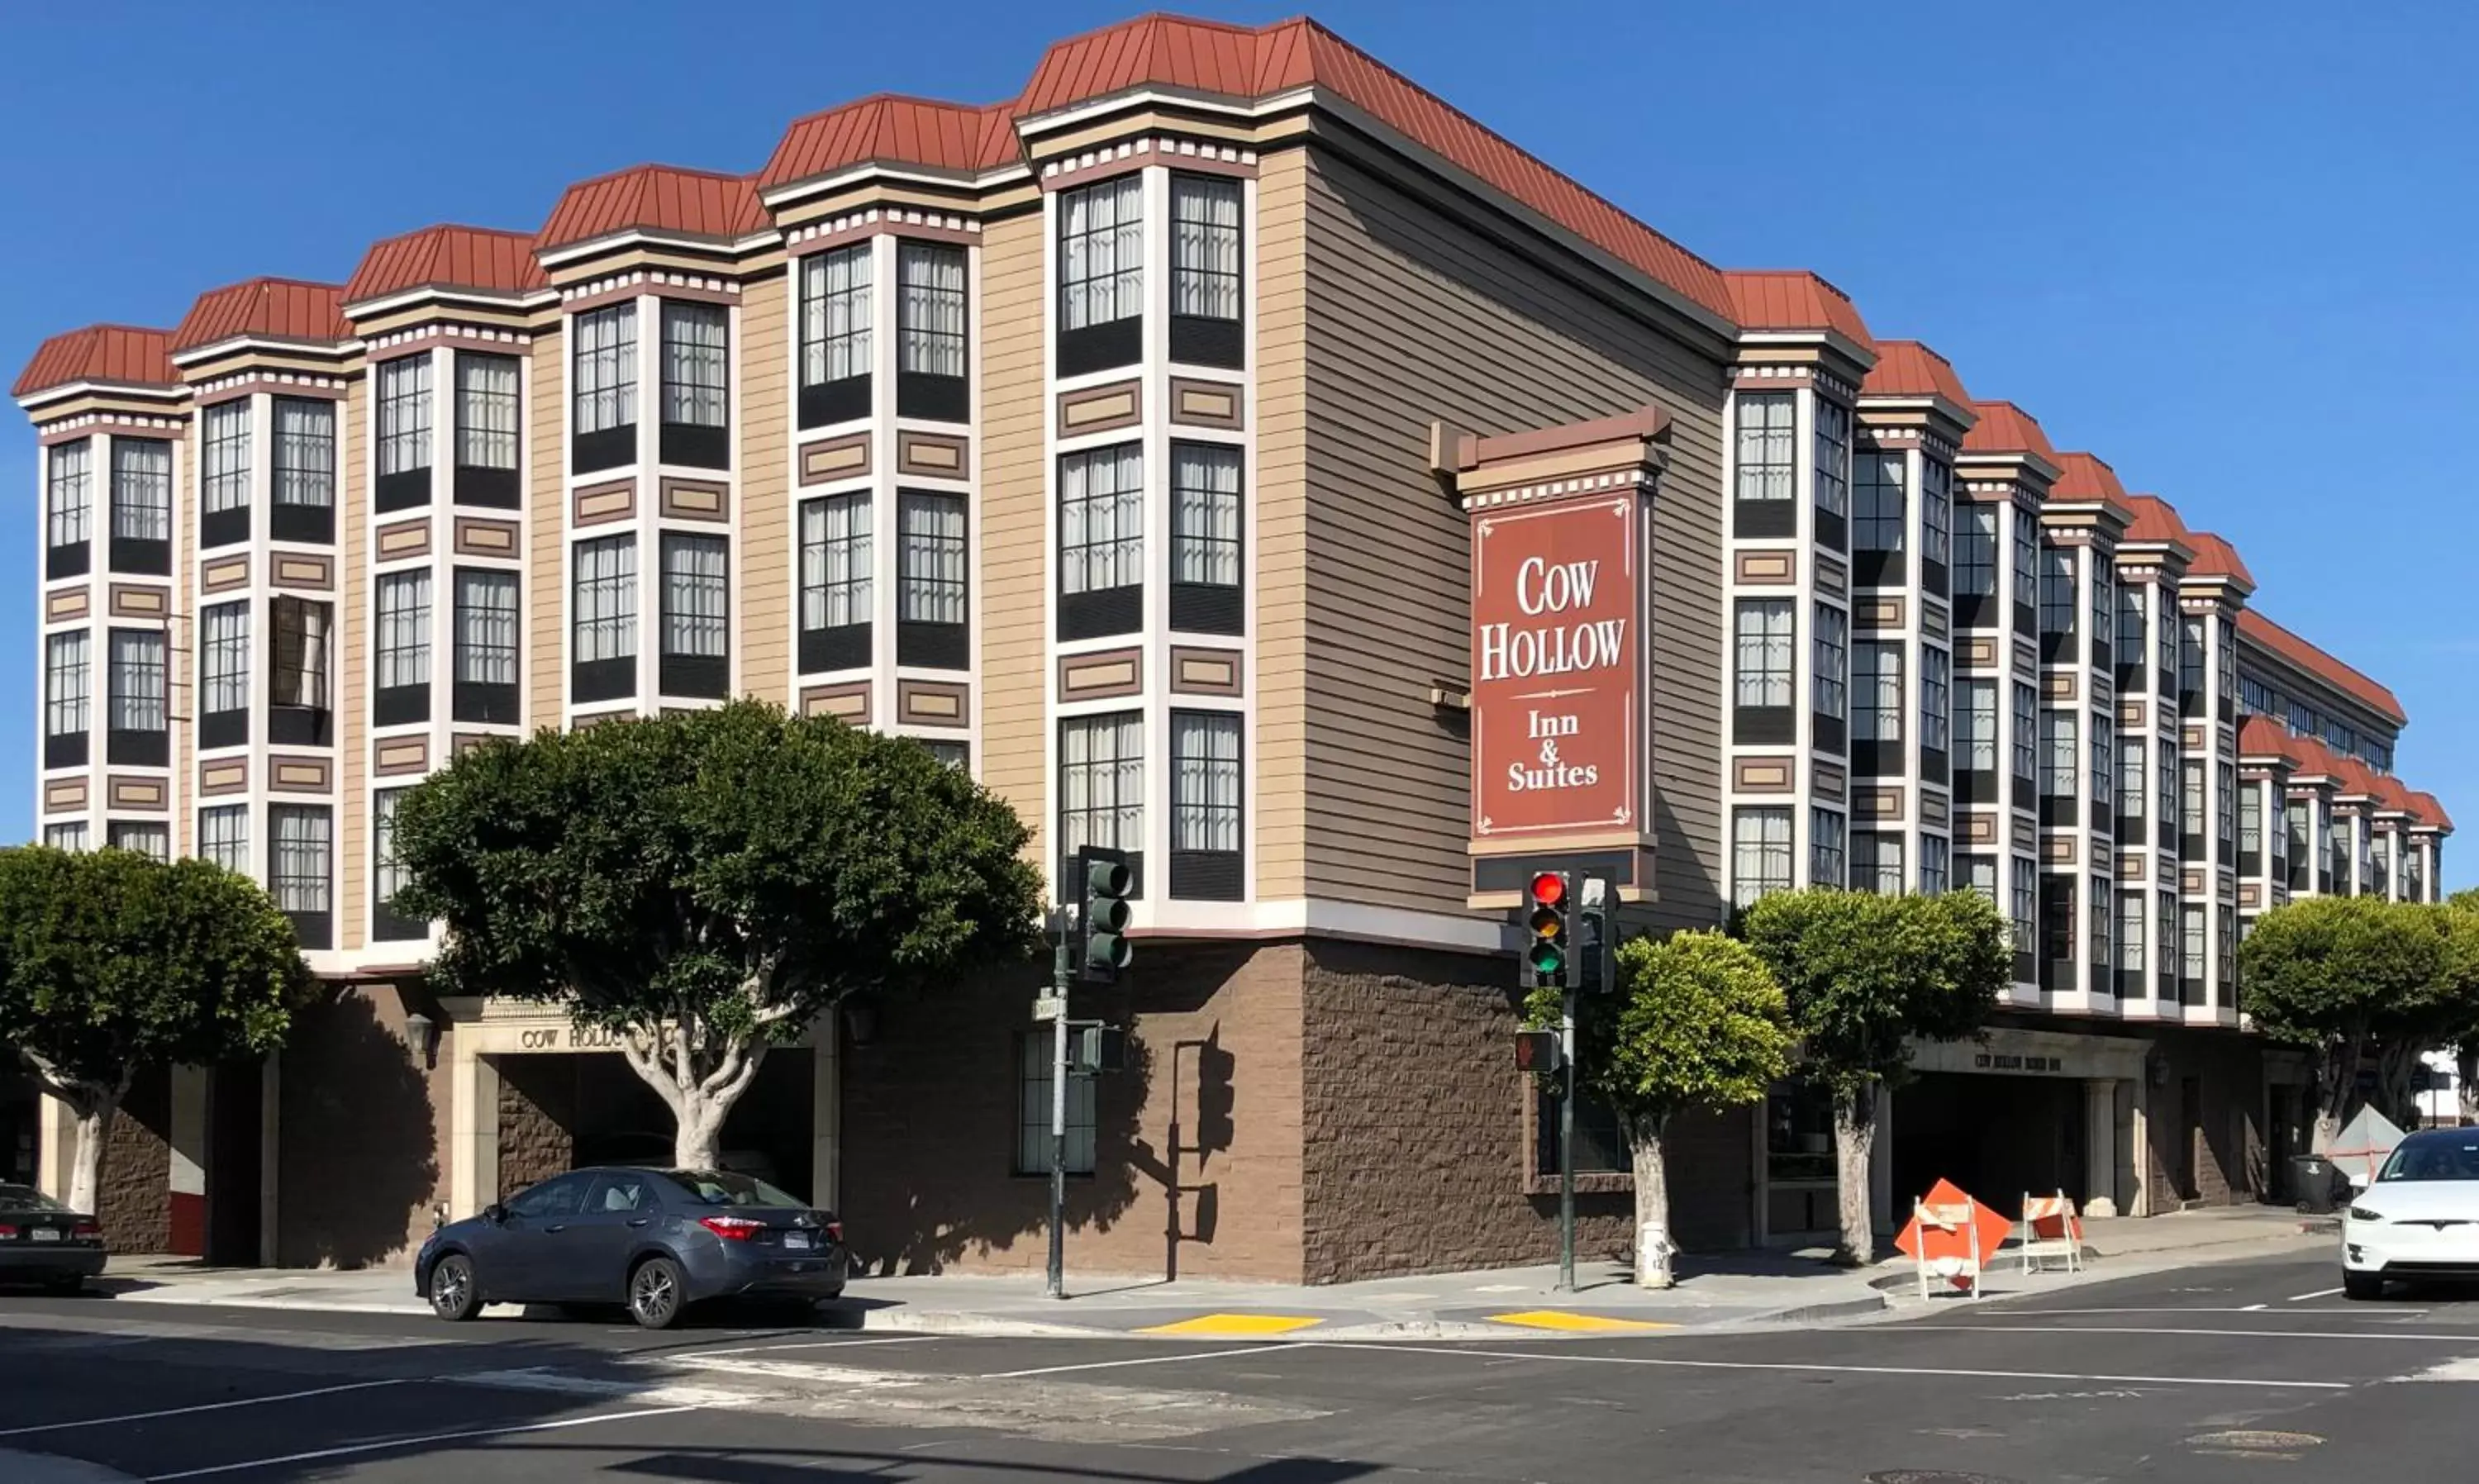 Facade/entrance, Property Building in Cow Hollow Inn and Suites